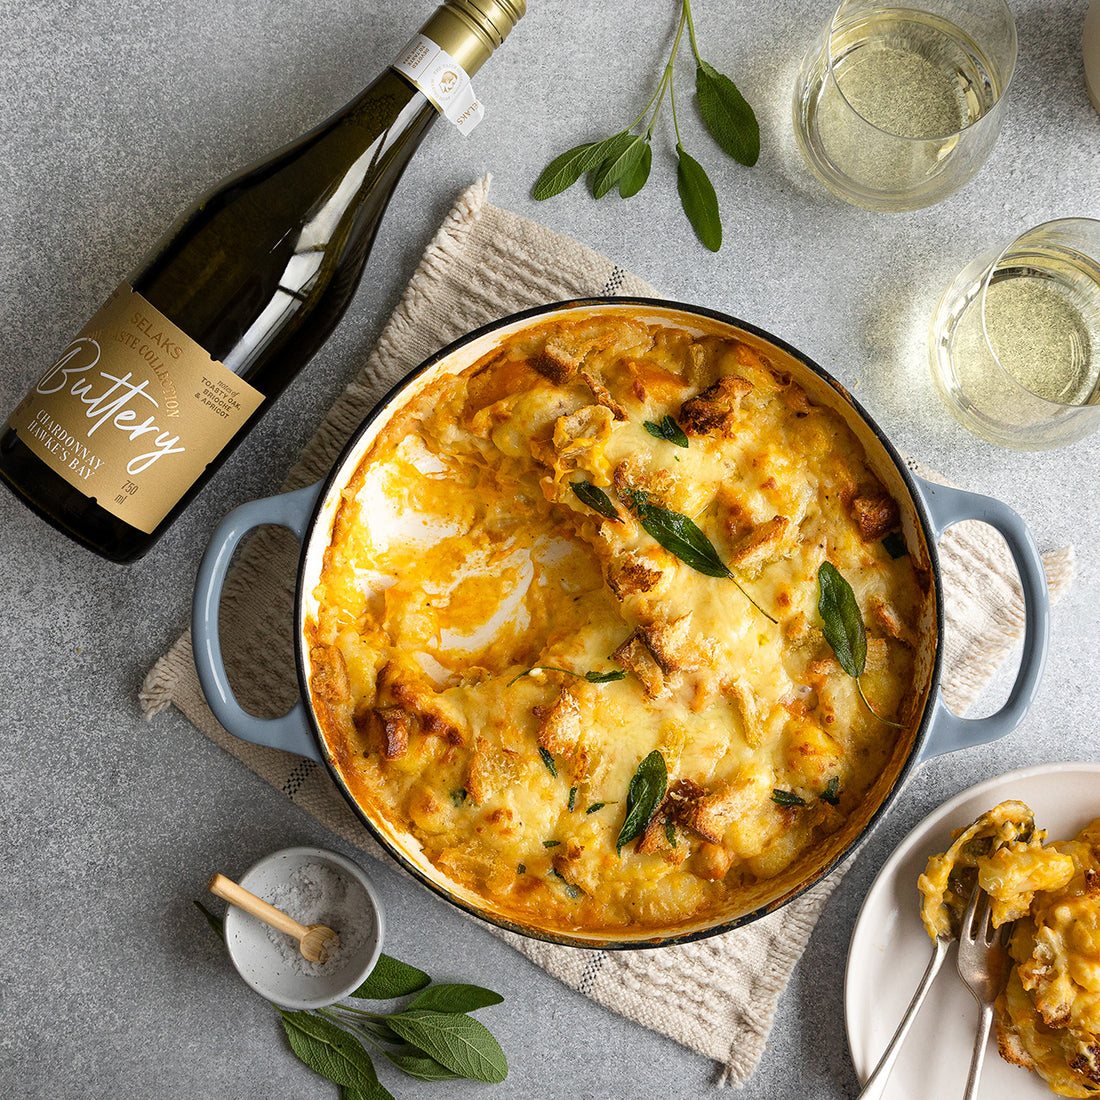 Pumpkin and sage baked gnocchi Paired Perfectly with Selaks The Taste Collection Buttery Chardonnay